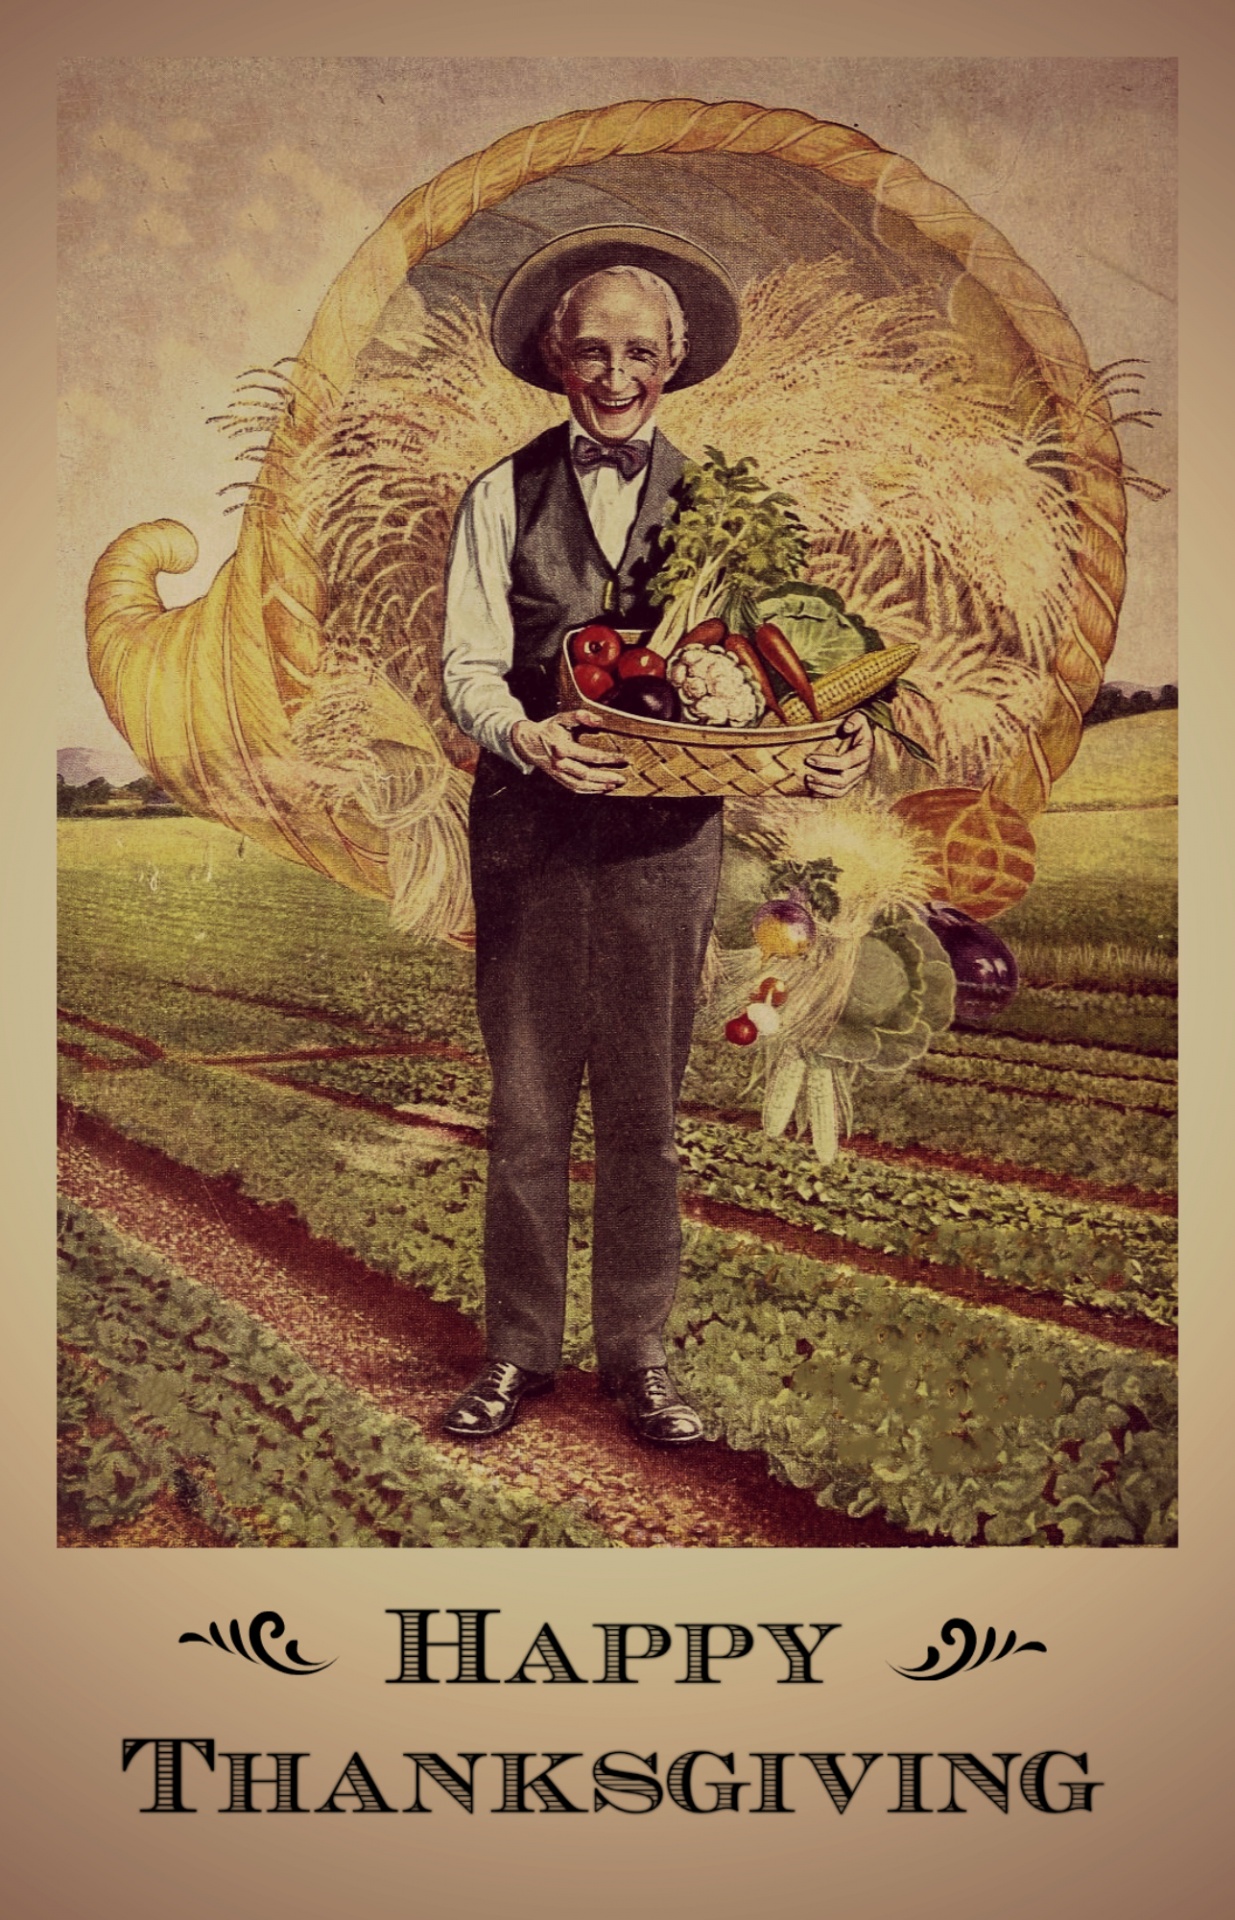 vintage poster for Thanksgiving featuring a farmer holding a basket of vegetables in front of a cornucopia